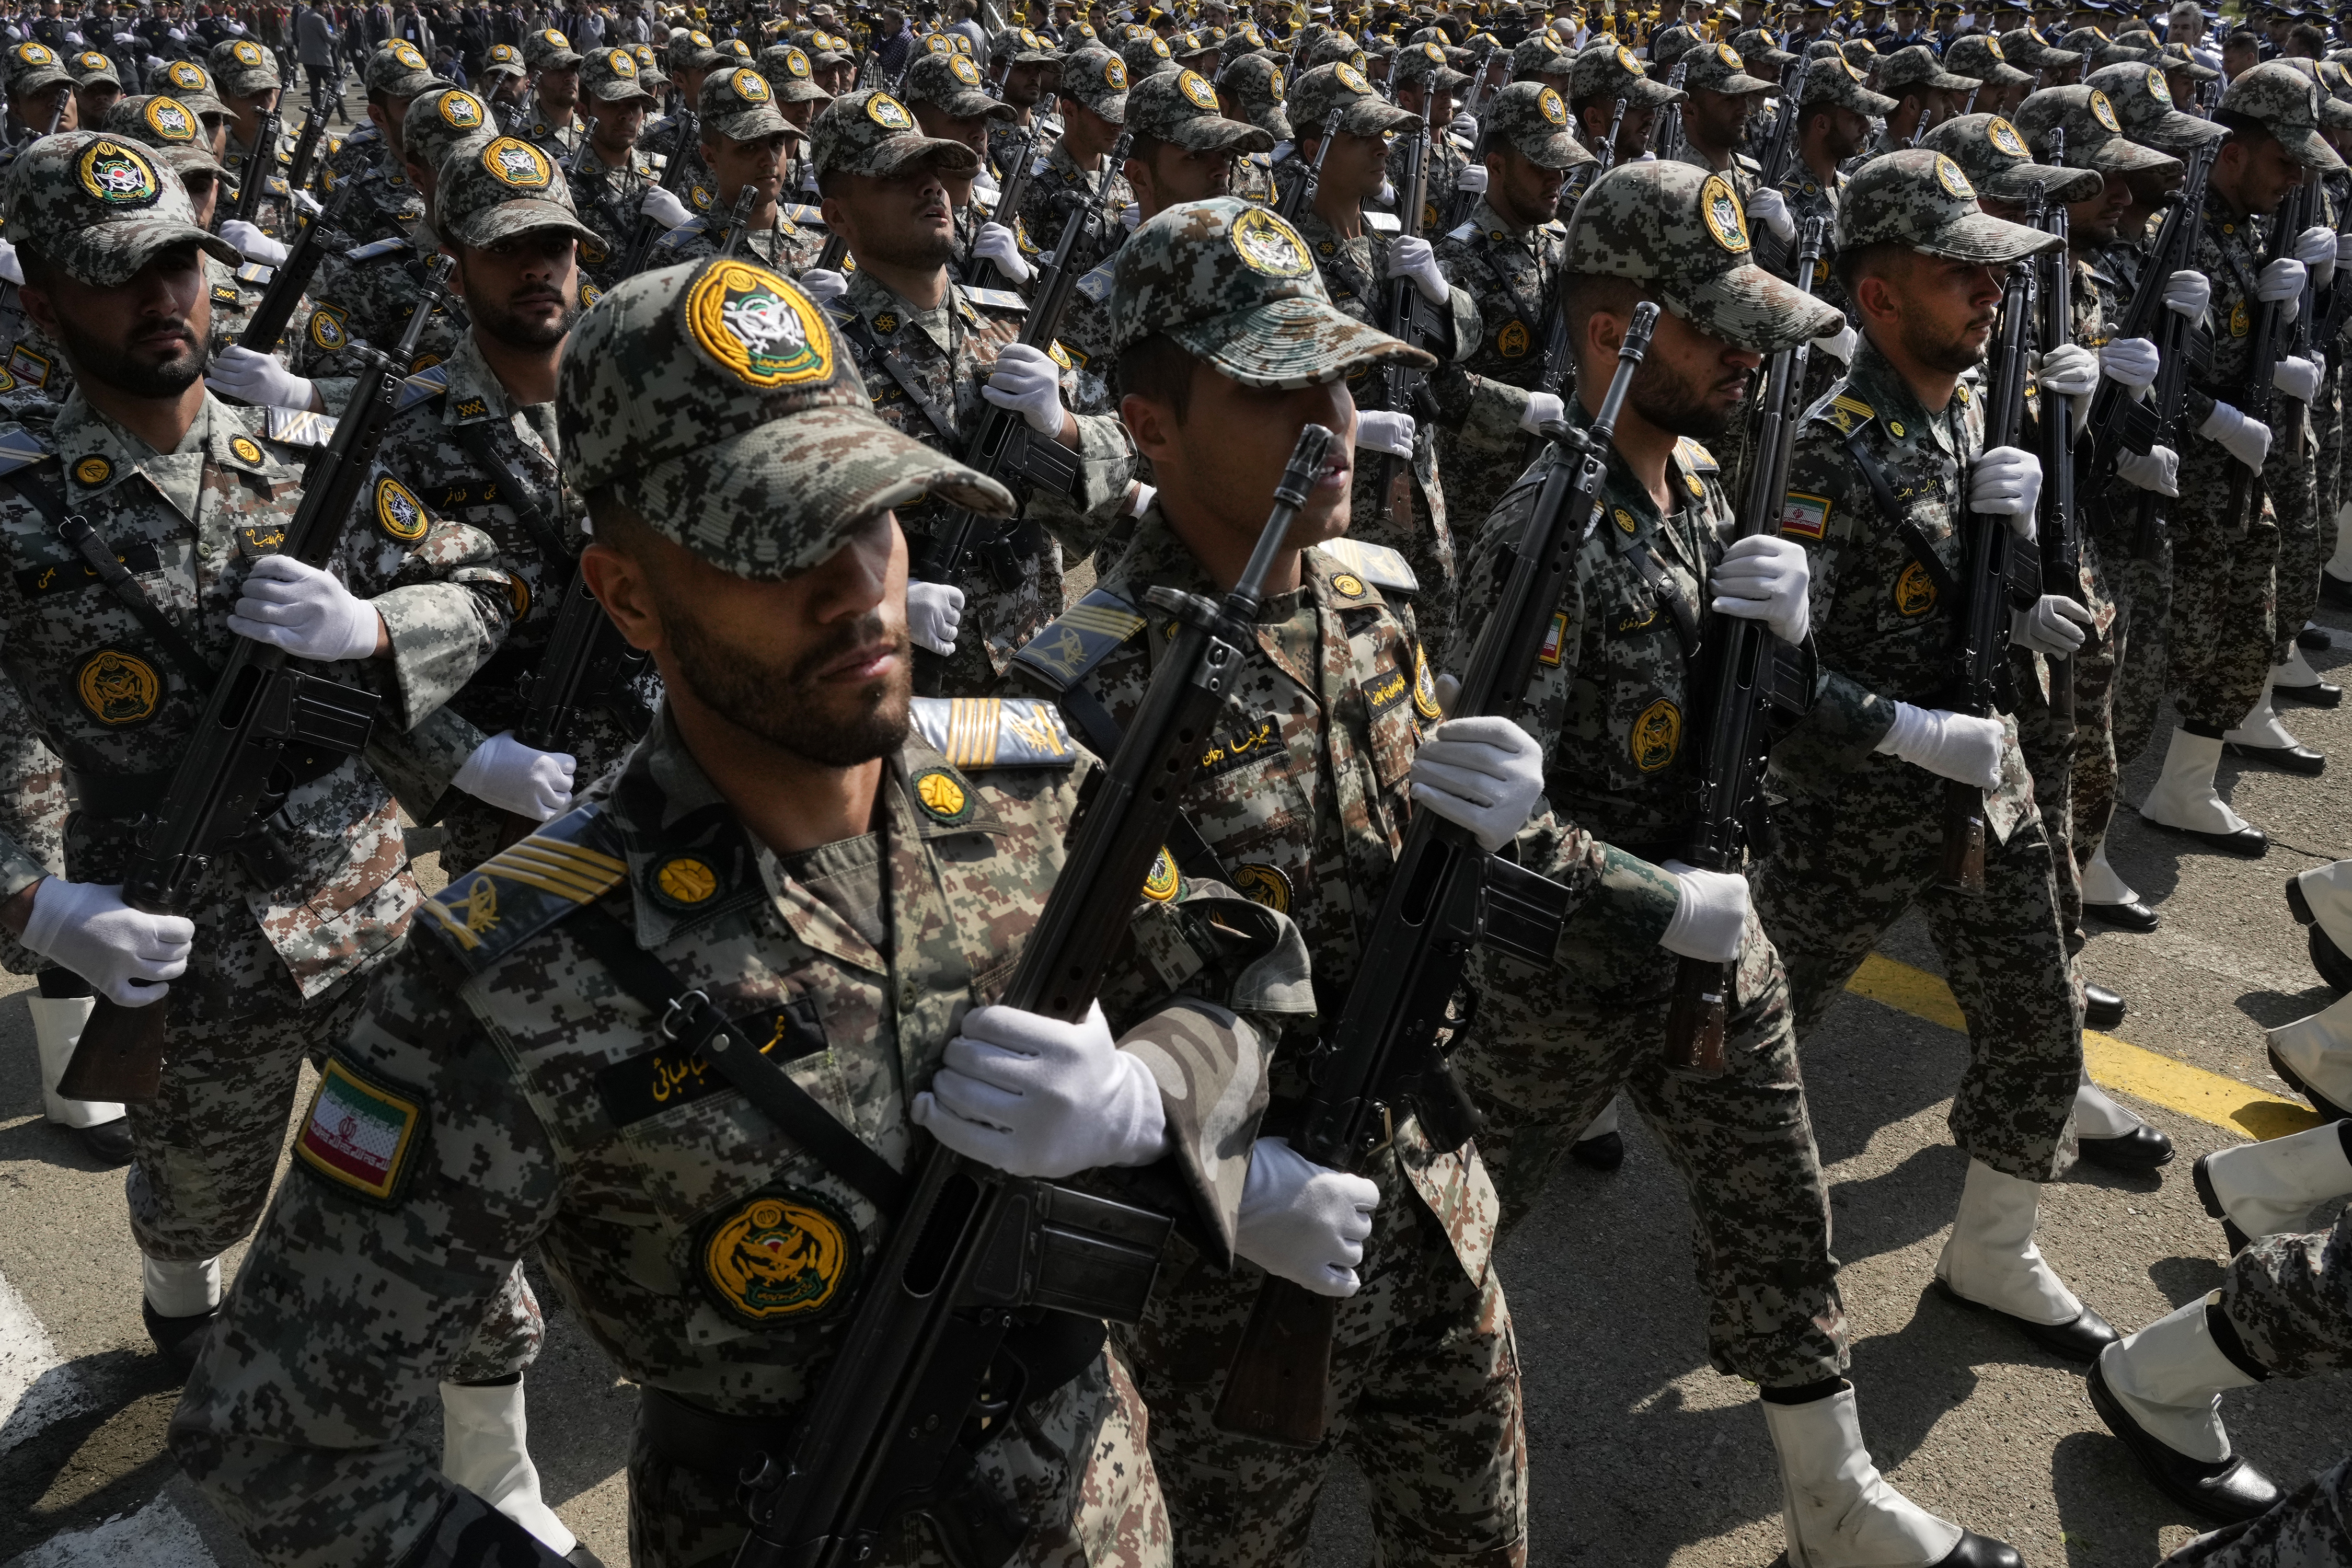 Iran shows military might as tensions with Israel soar